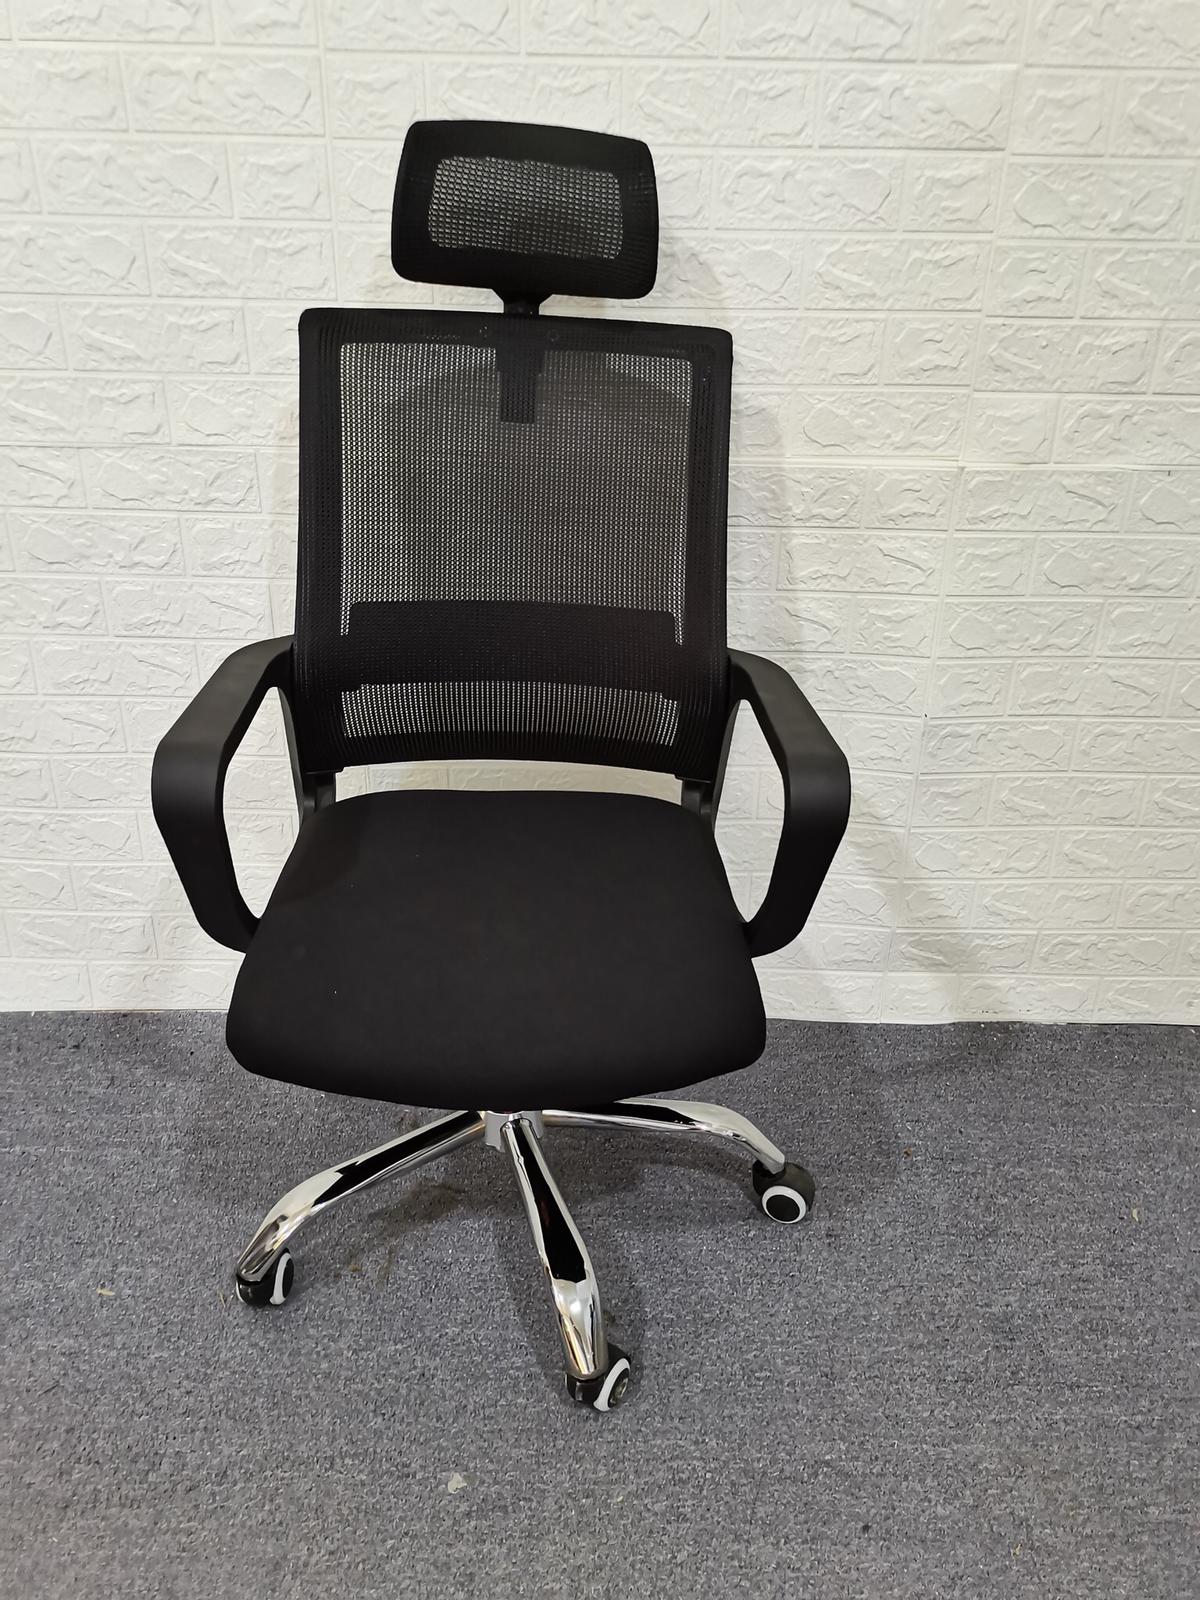 Ergonomic Mesh Office Chair, High Back Desk Chair - Adjustable Headrest and Height, Fixed Armrest -  Tilt Function, Comfortable Back Support and Roller Wheels, Swivel Computer Task Chair - image 3 of 5